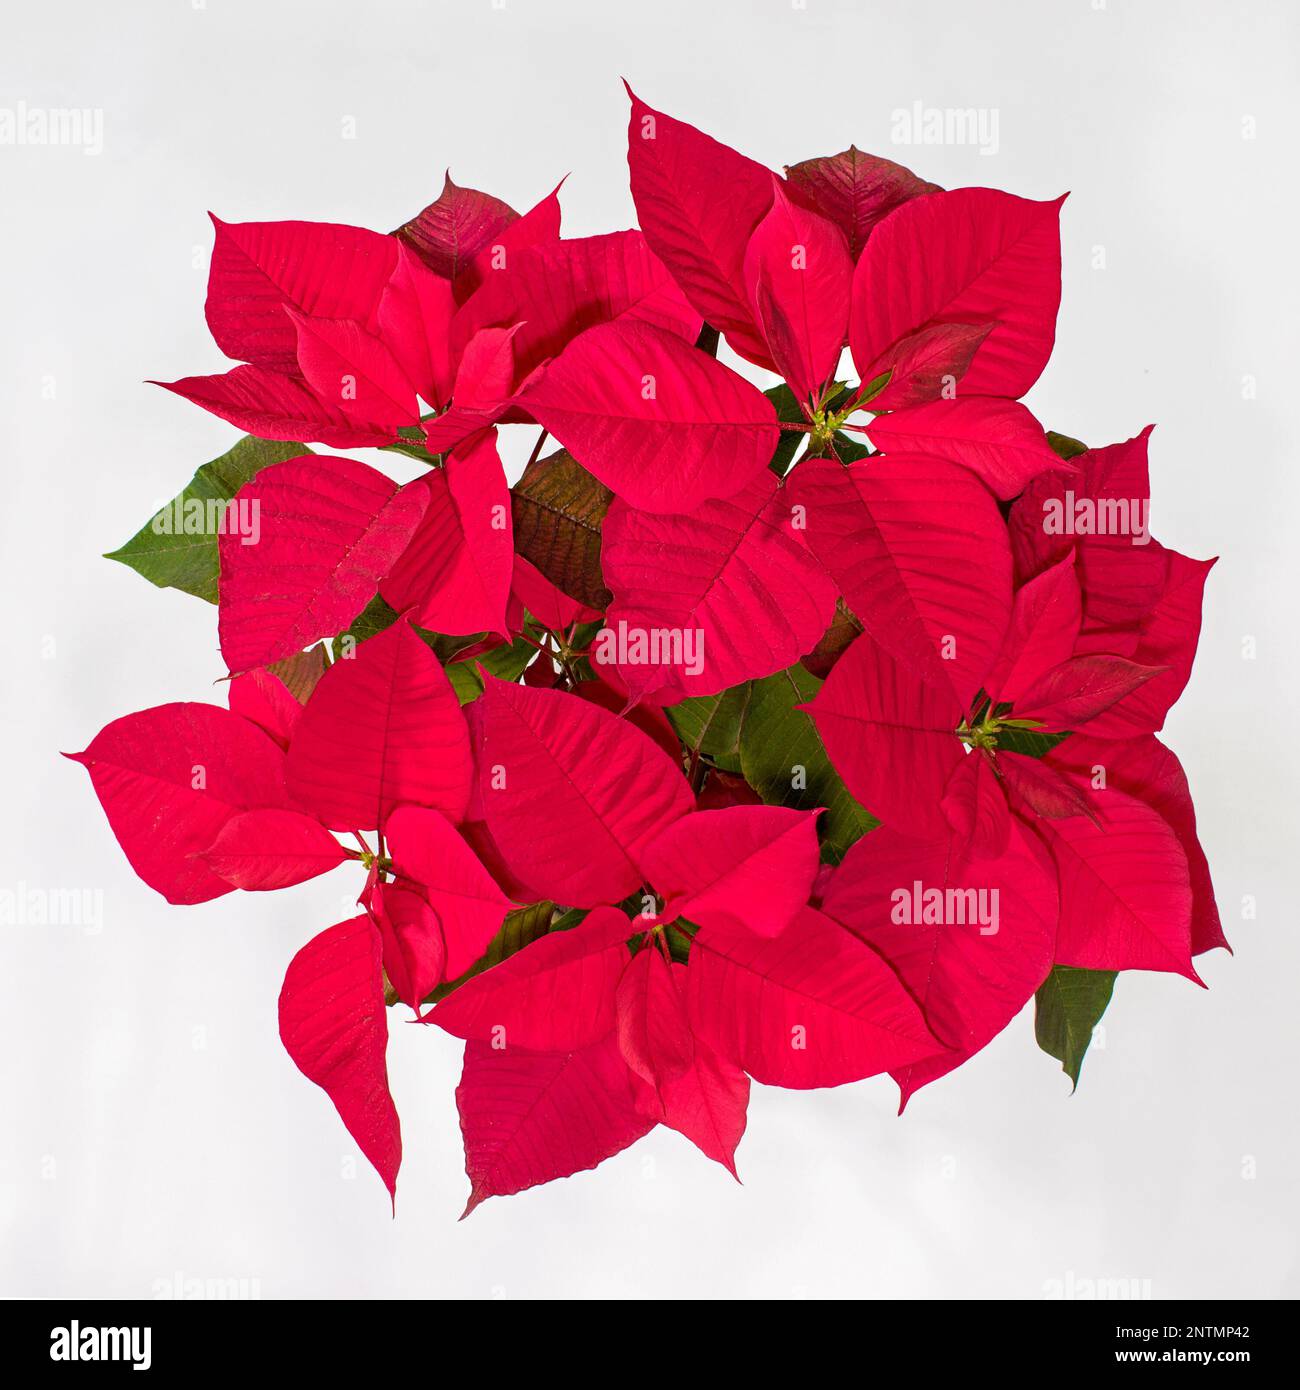 top down view of a large bright red Euphorbia pulcherrima potted poinsettia house plant on a white background showing green leaves under the bracts Stock Photo